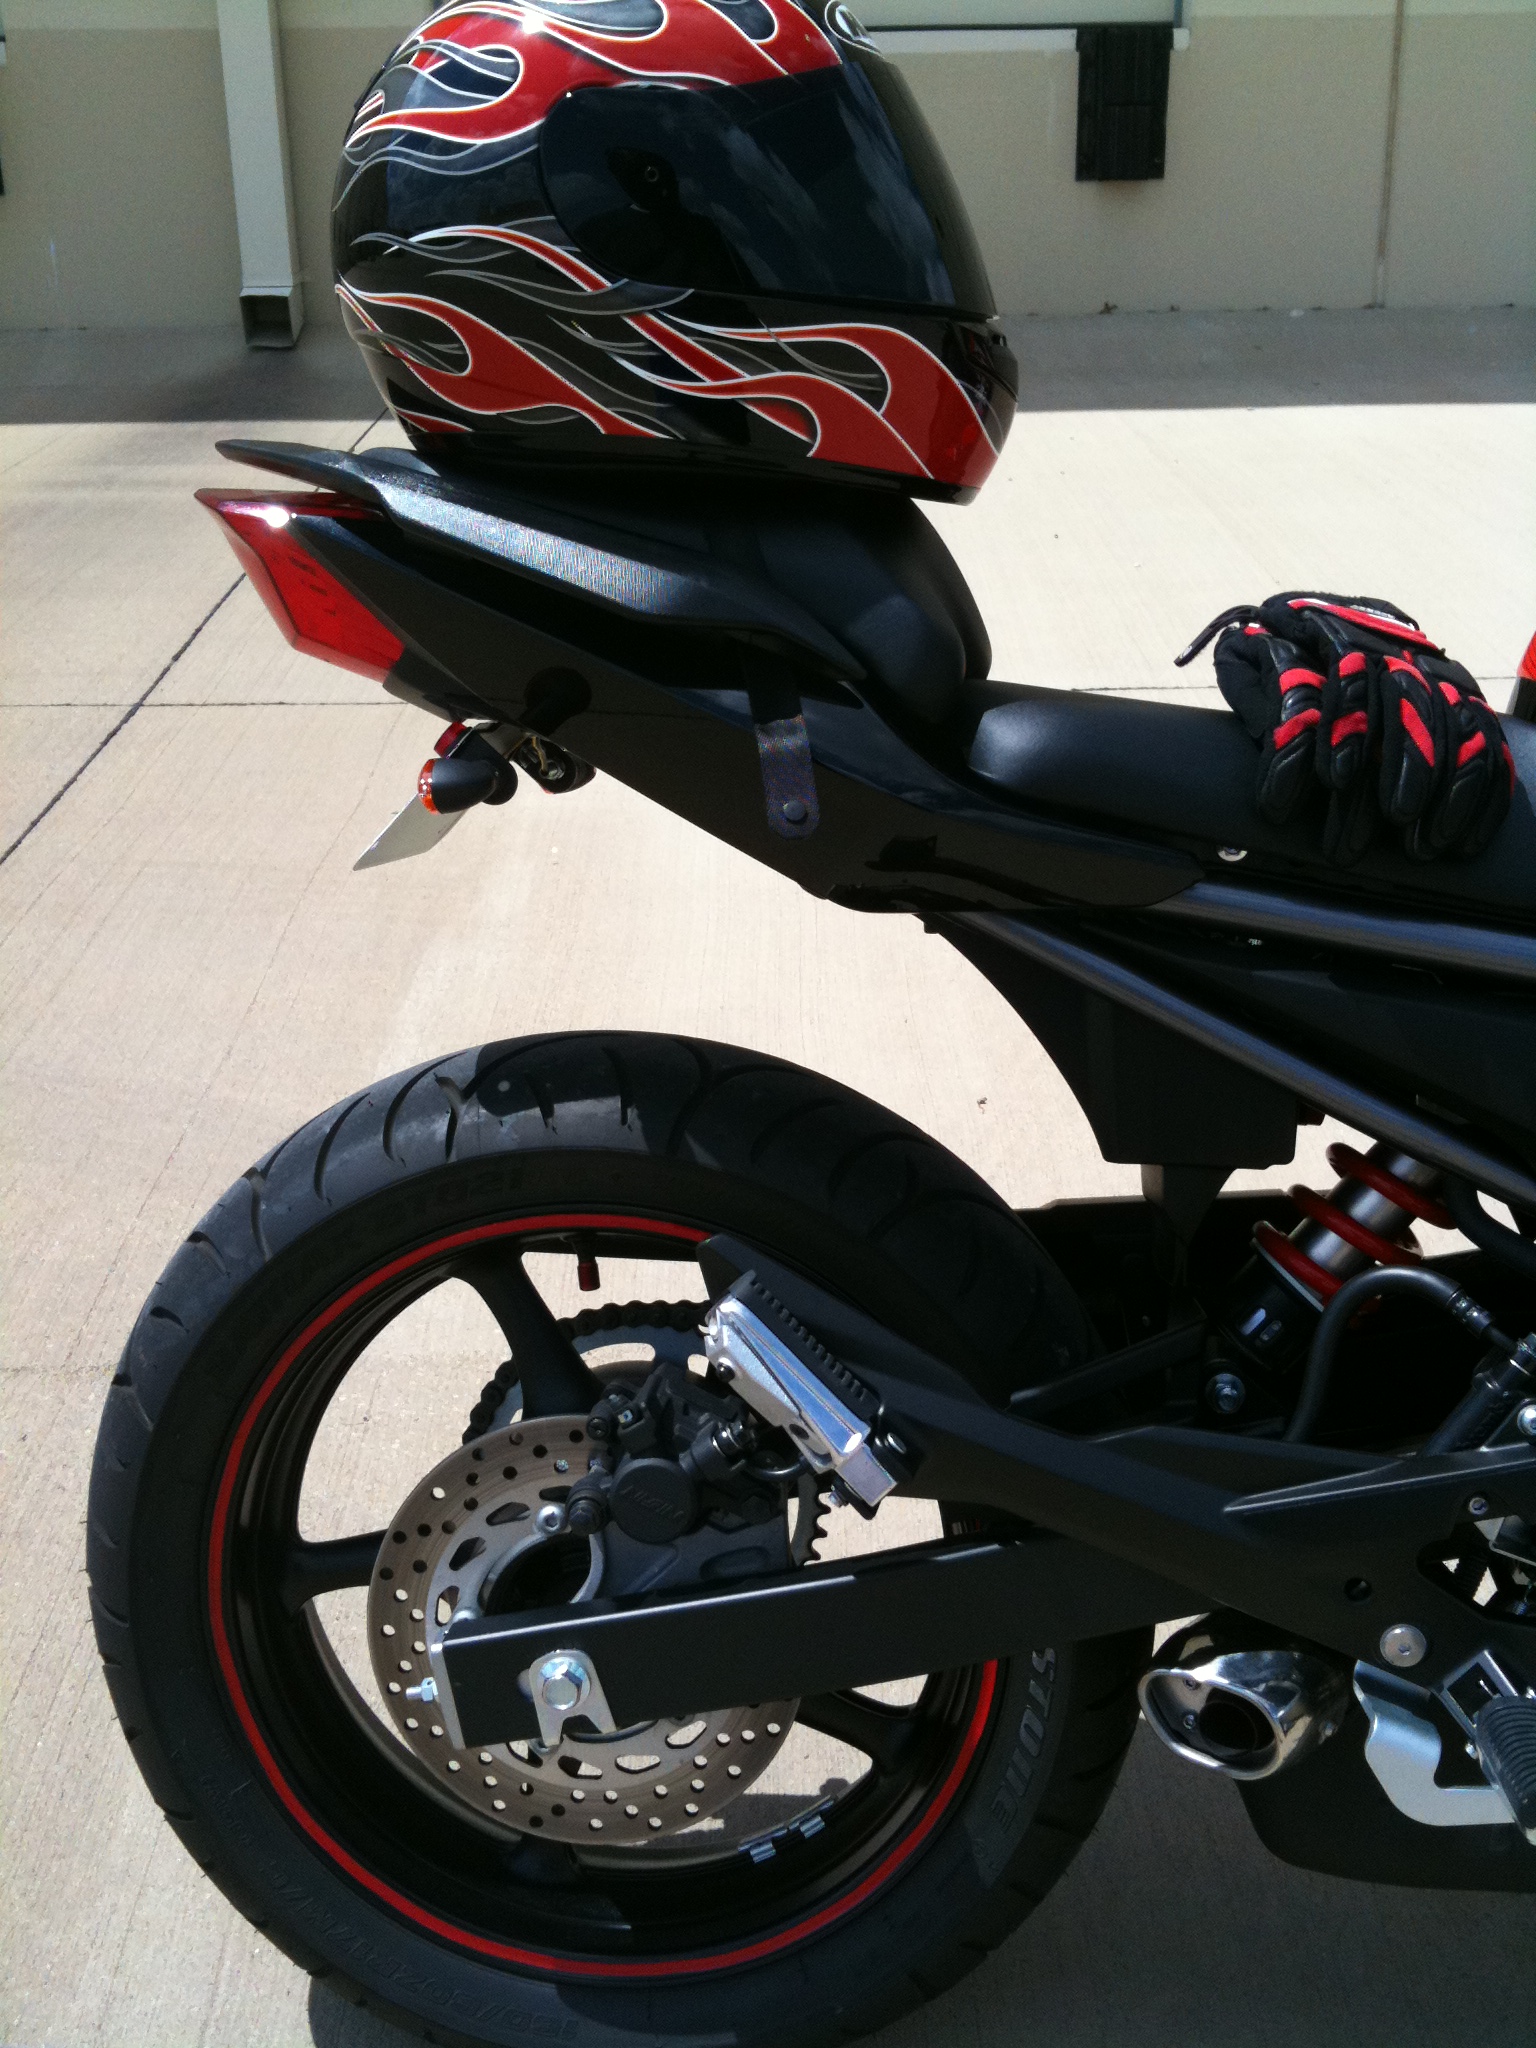 Black and Red FZ6r